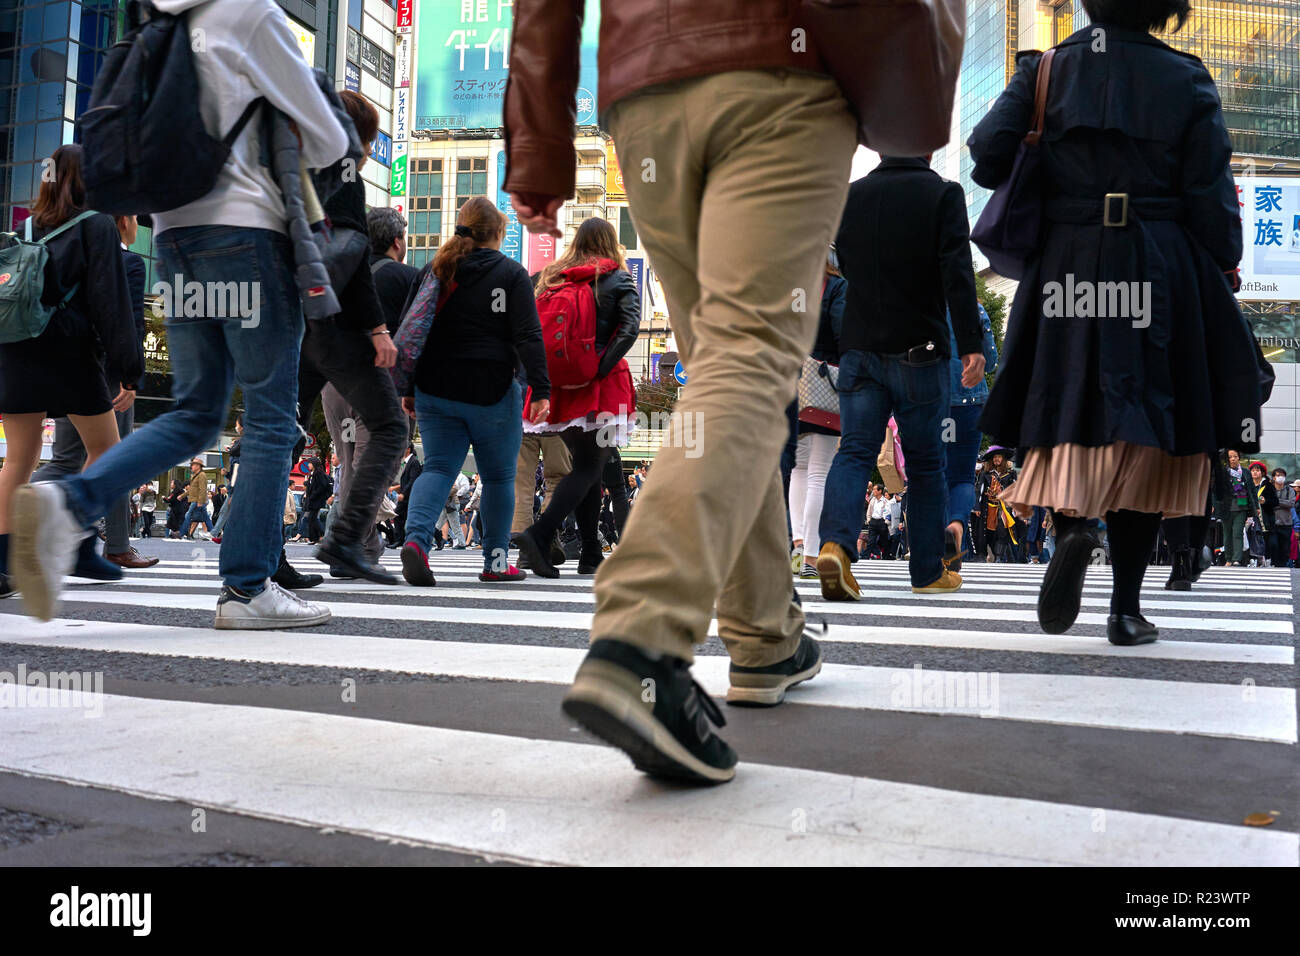 Low angle view of crowds walking through the Shibuya Crossing, Tokyo, Japan, Asia Stock Photo